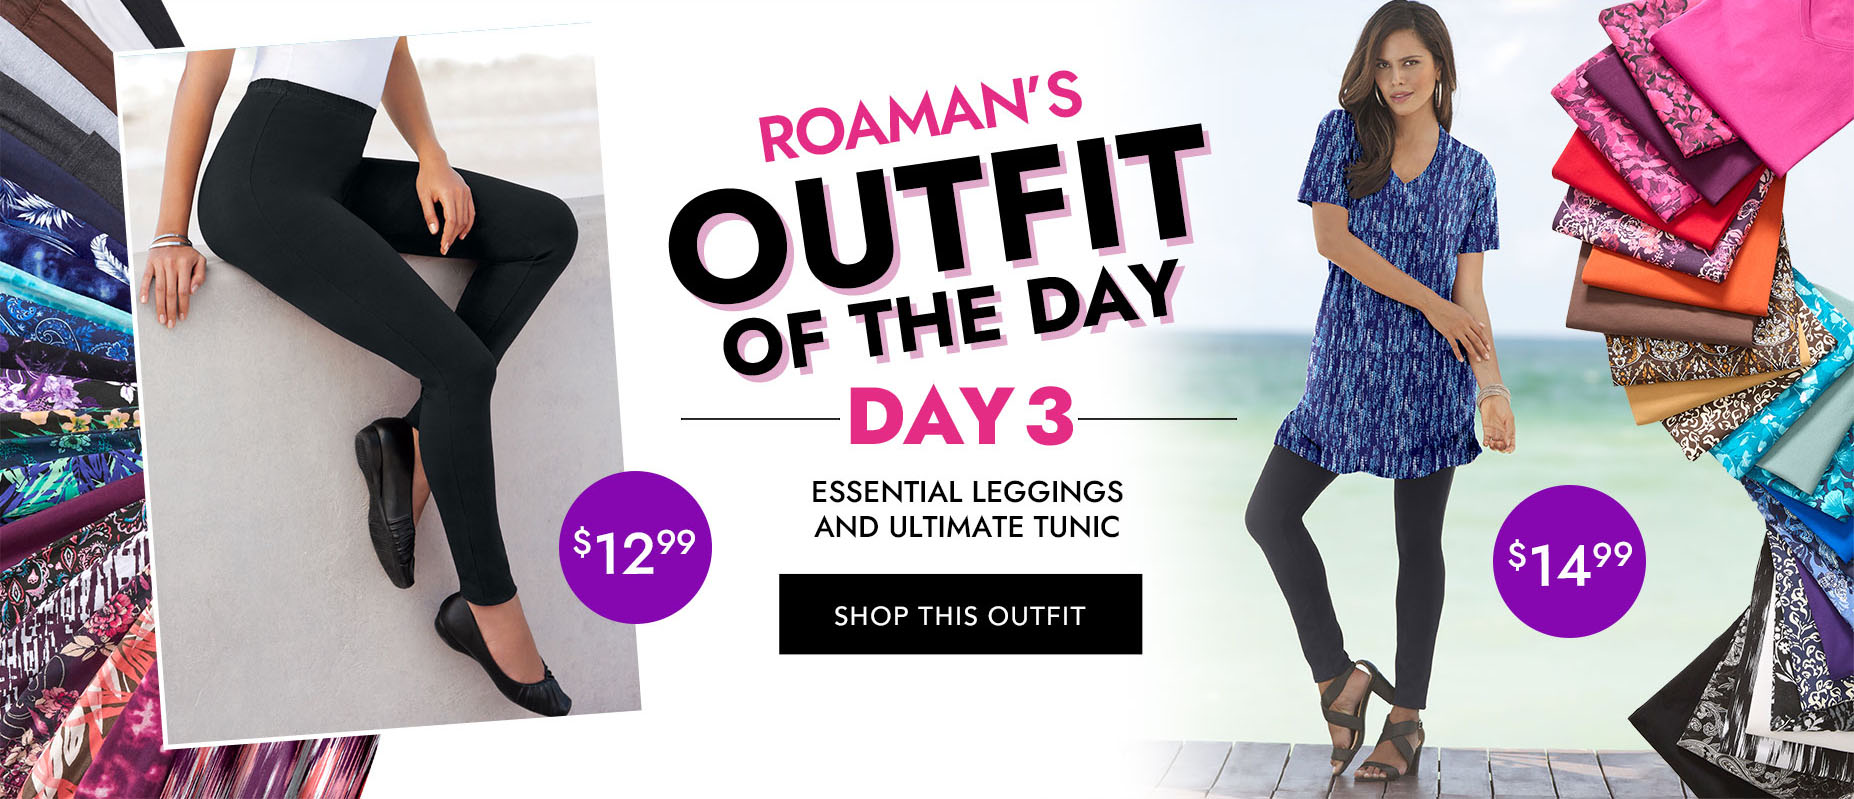 Today Only! SHOP THIS OUTFIT